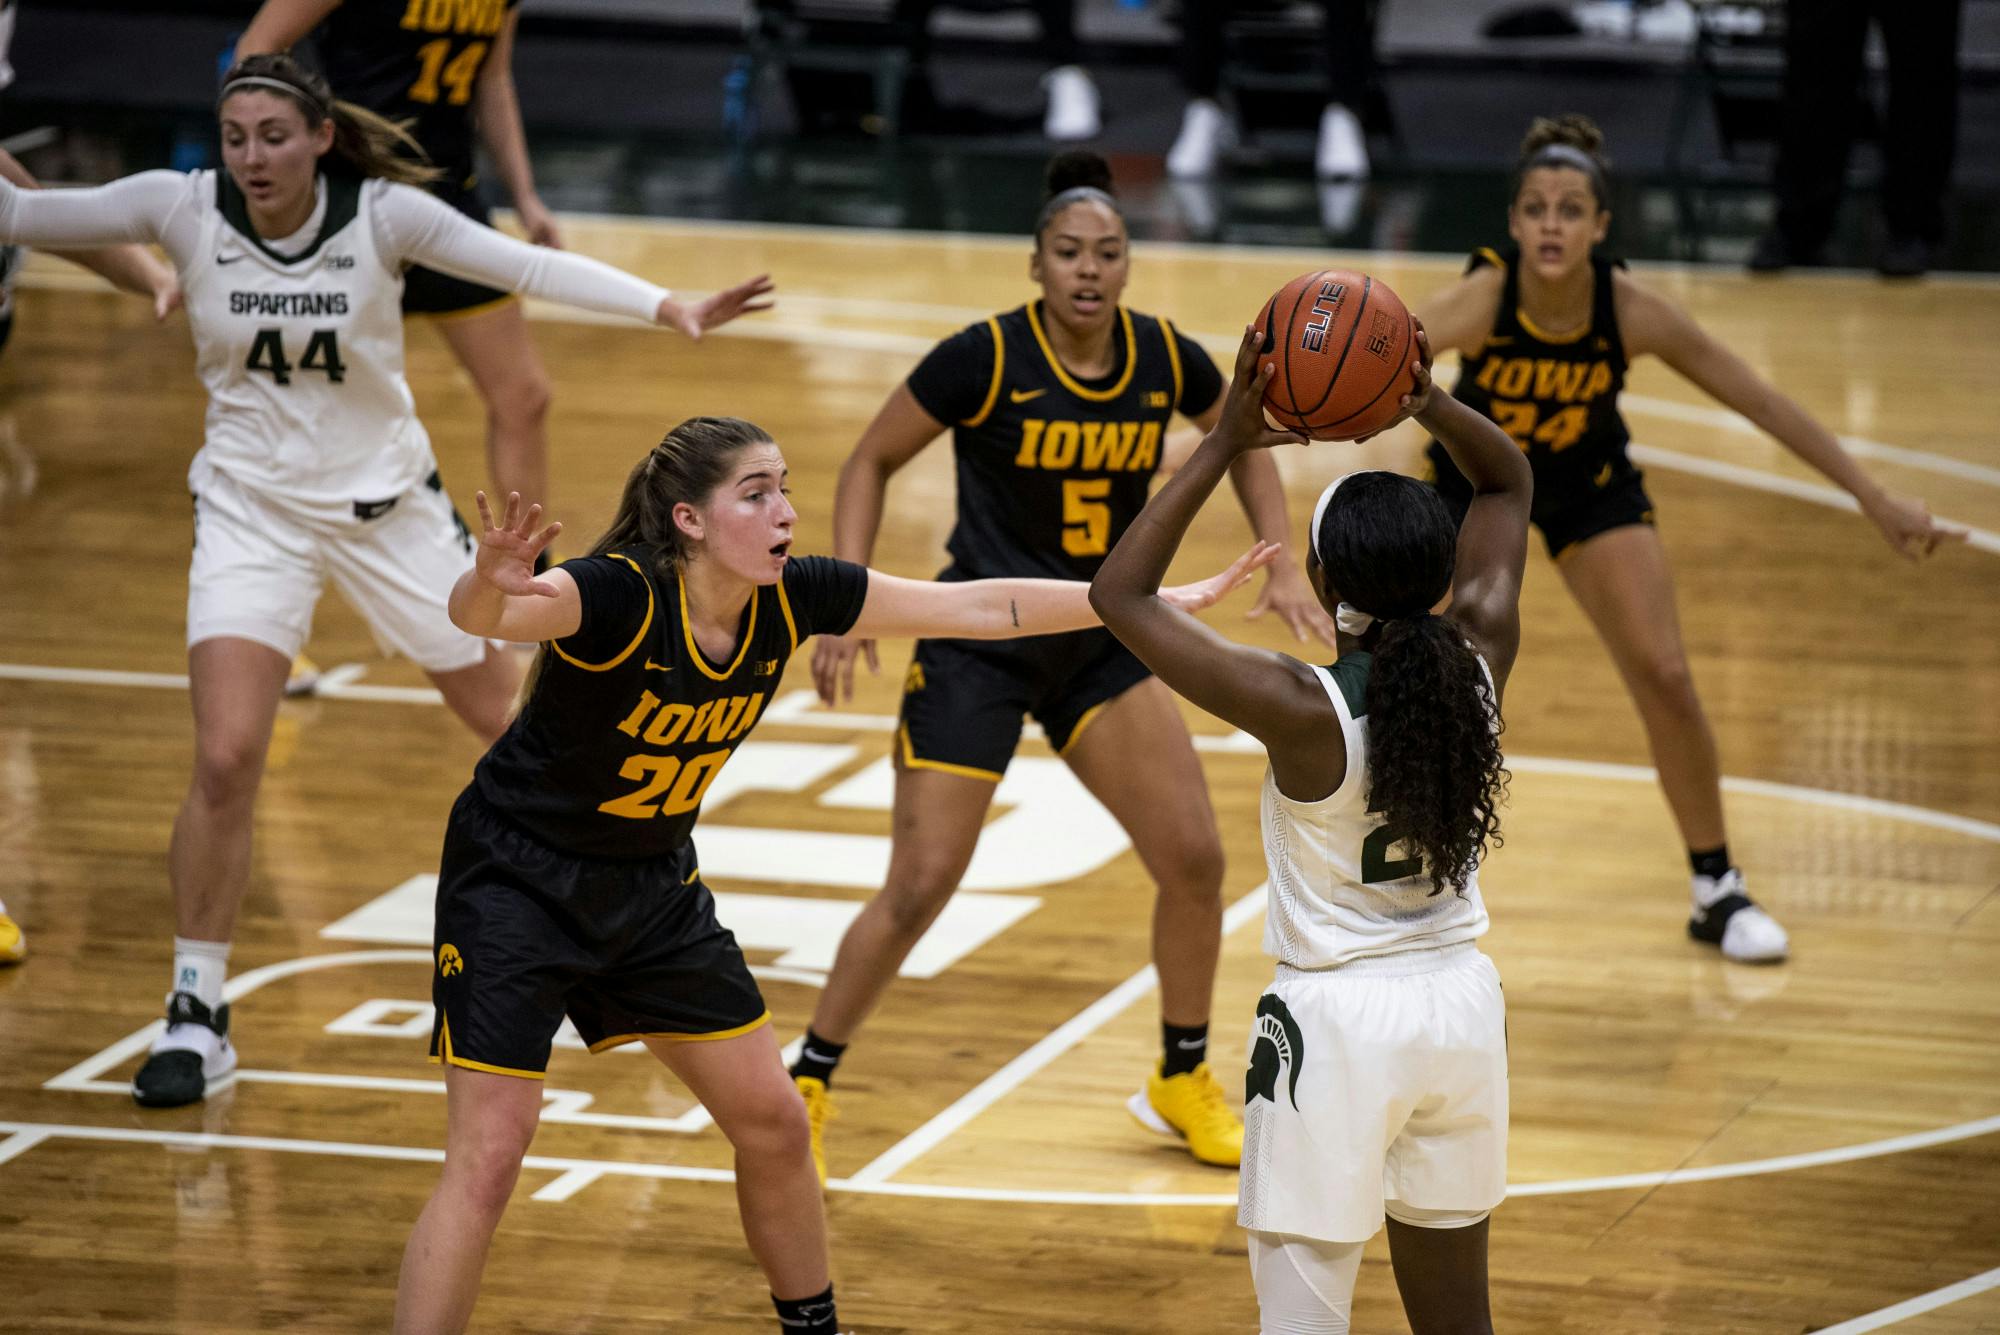 <p>Junior guard Nia Clouden (24) blocked on all sides during a game against Iowa on Dec. 12, 2020 at the Breslin Center. The Spartans defeated the Hawkeyes 86-82.</p>